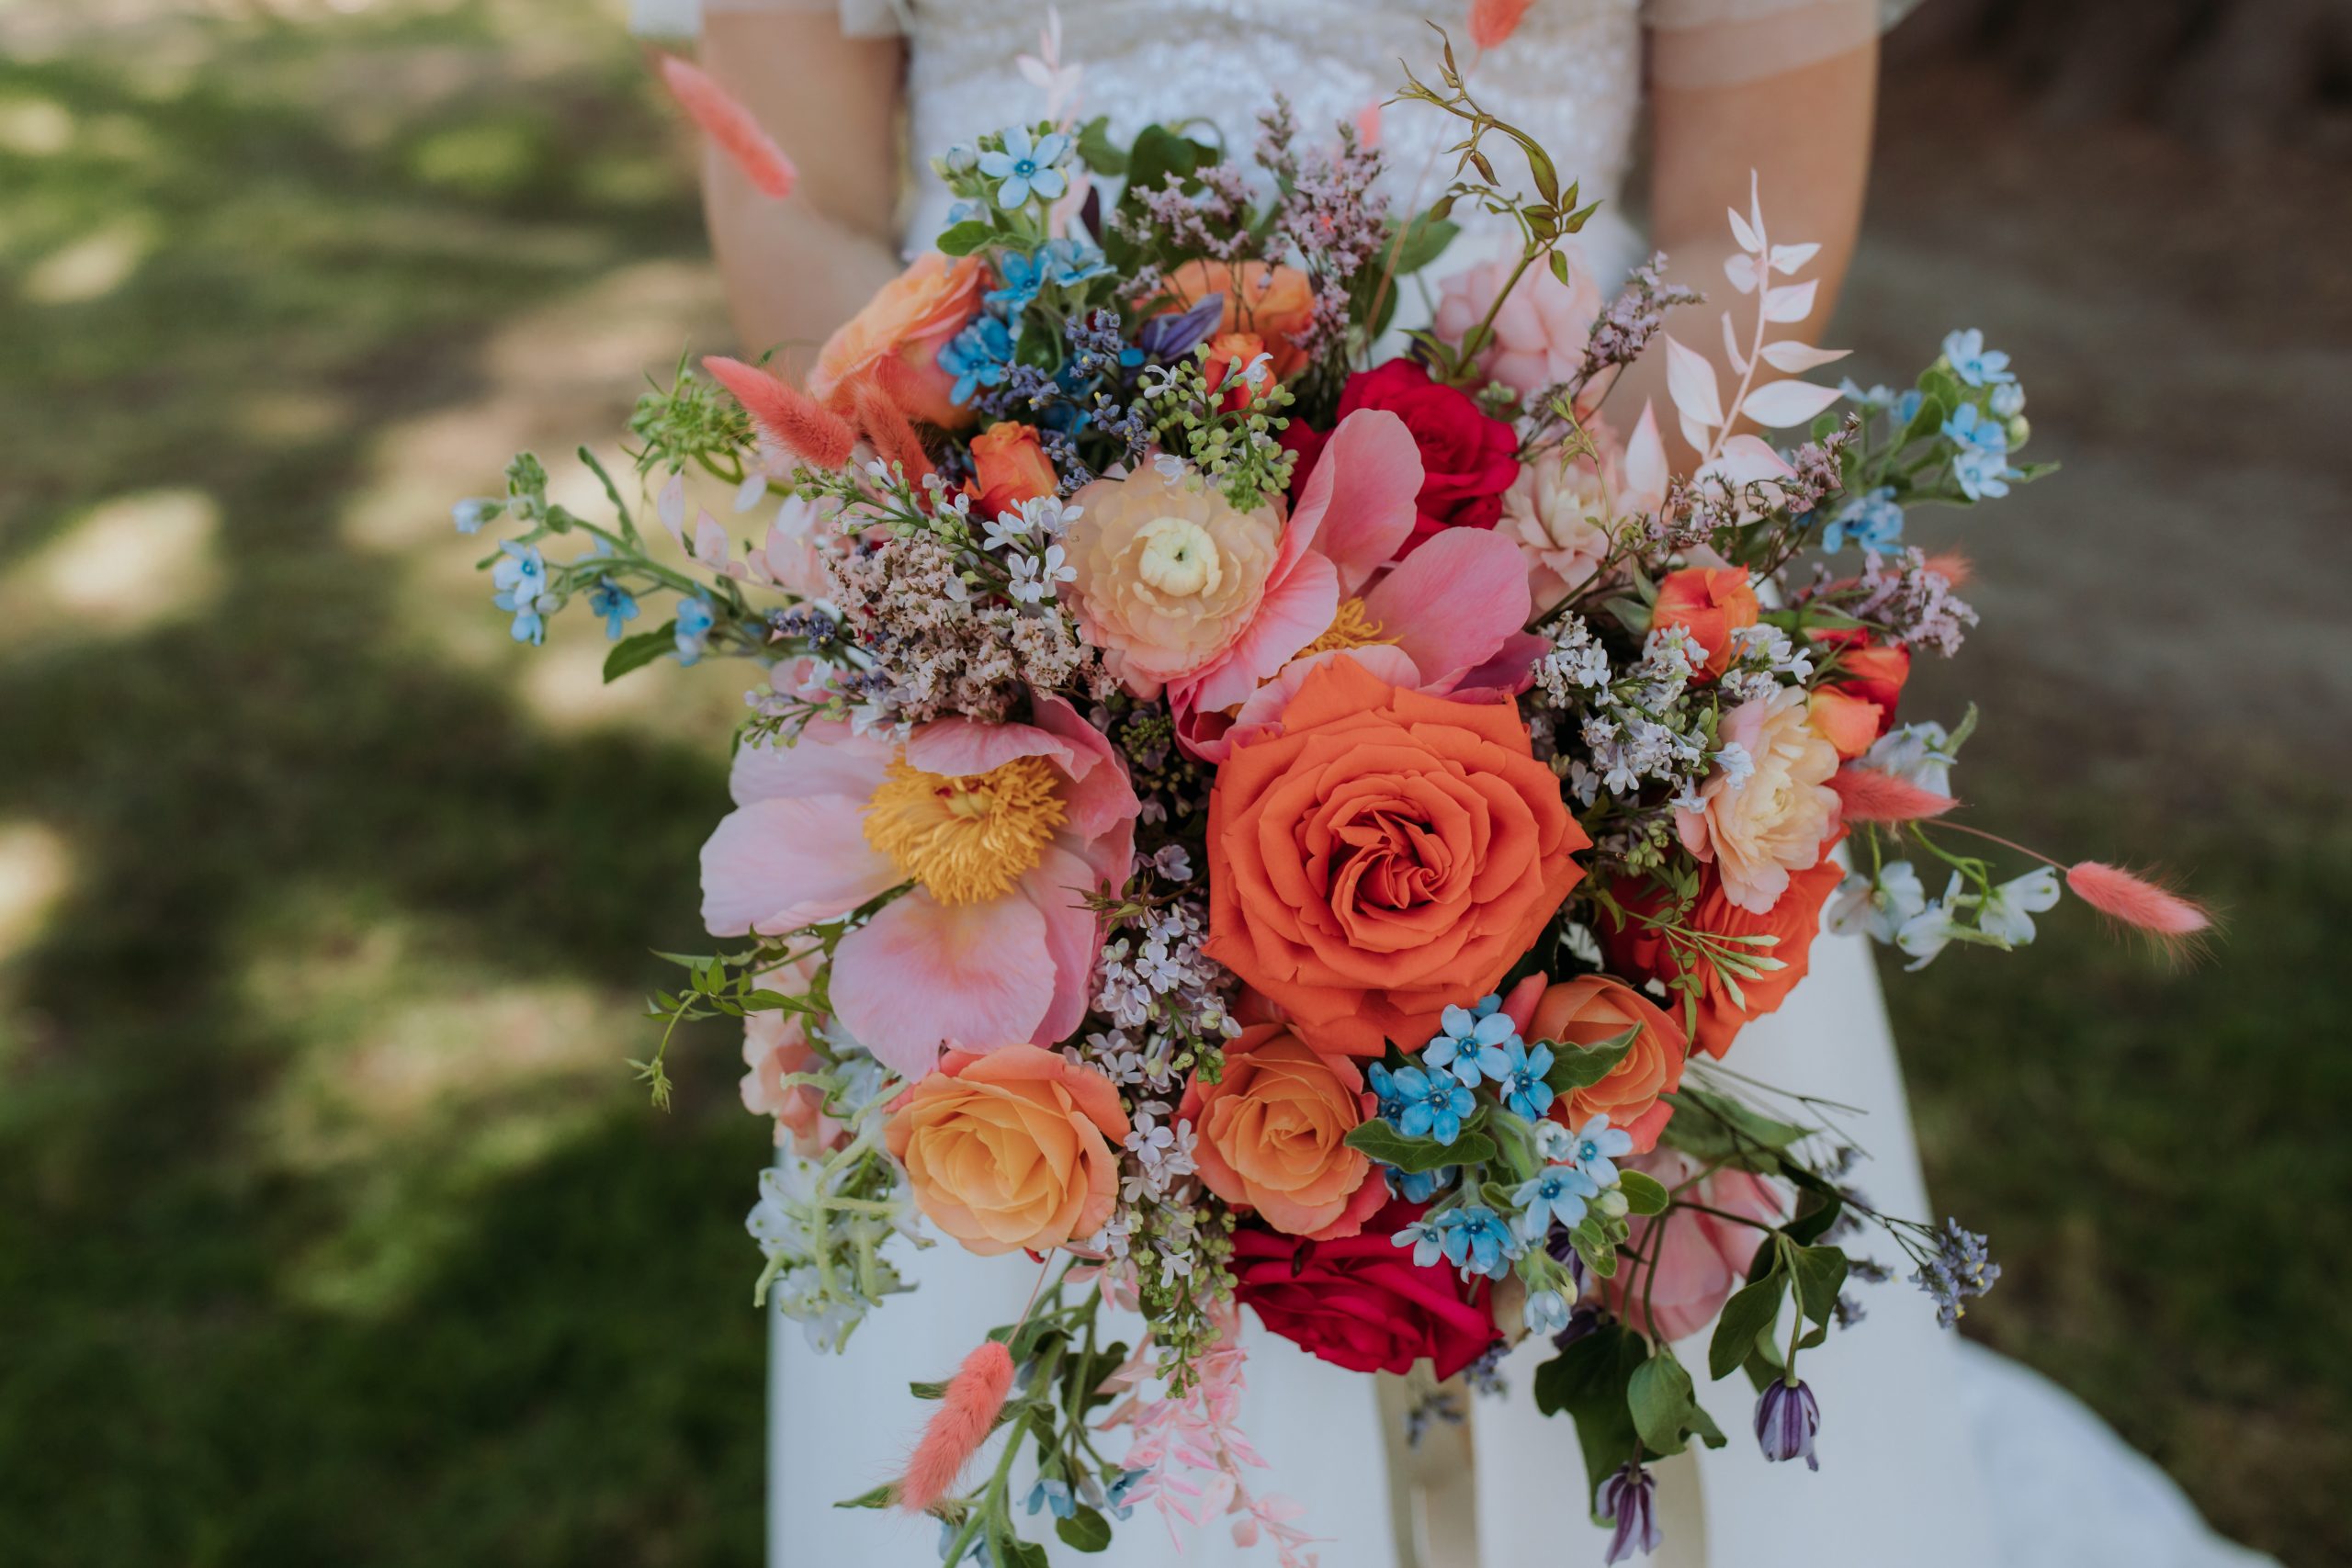 A bright and colourful bouquet filled with pink, orange and blue flowers